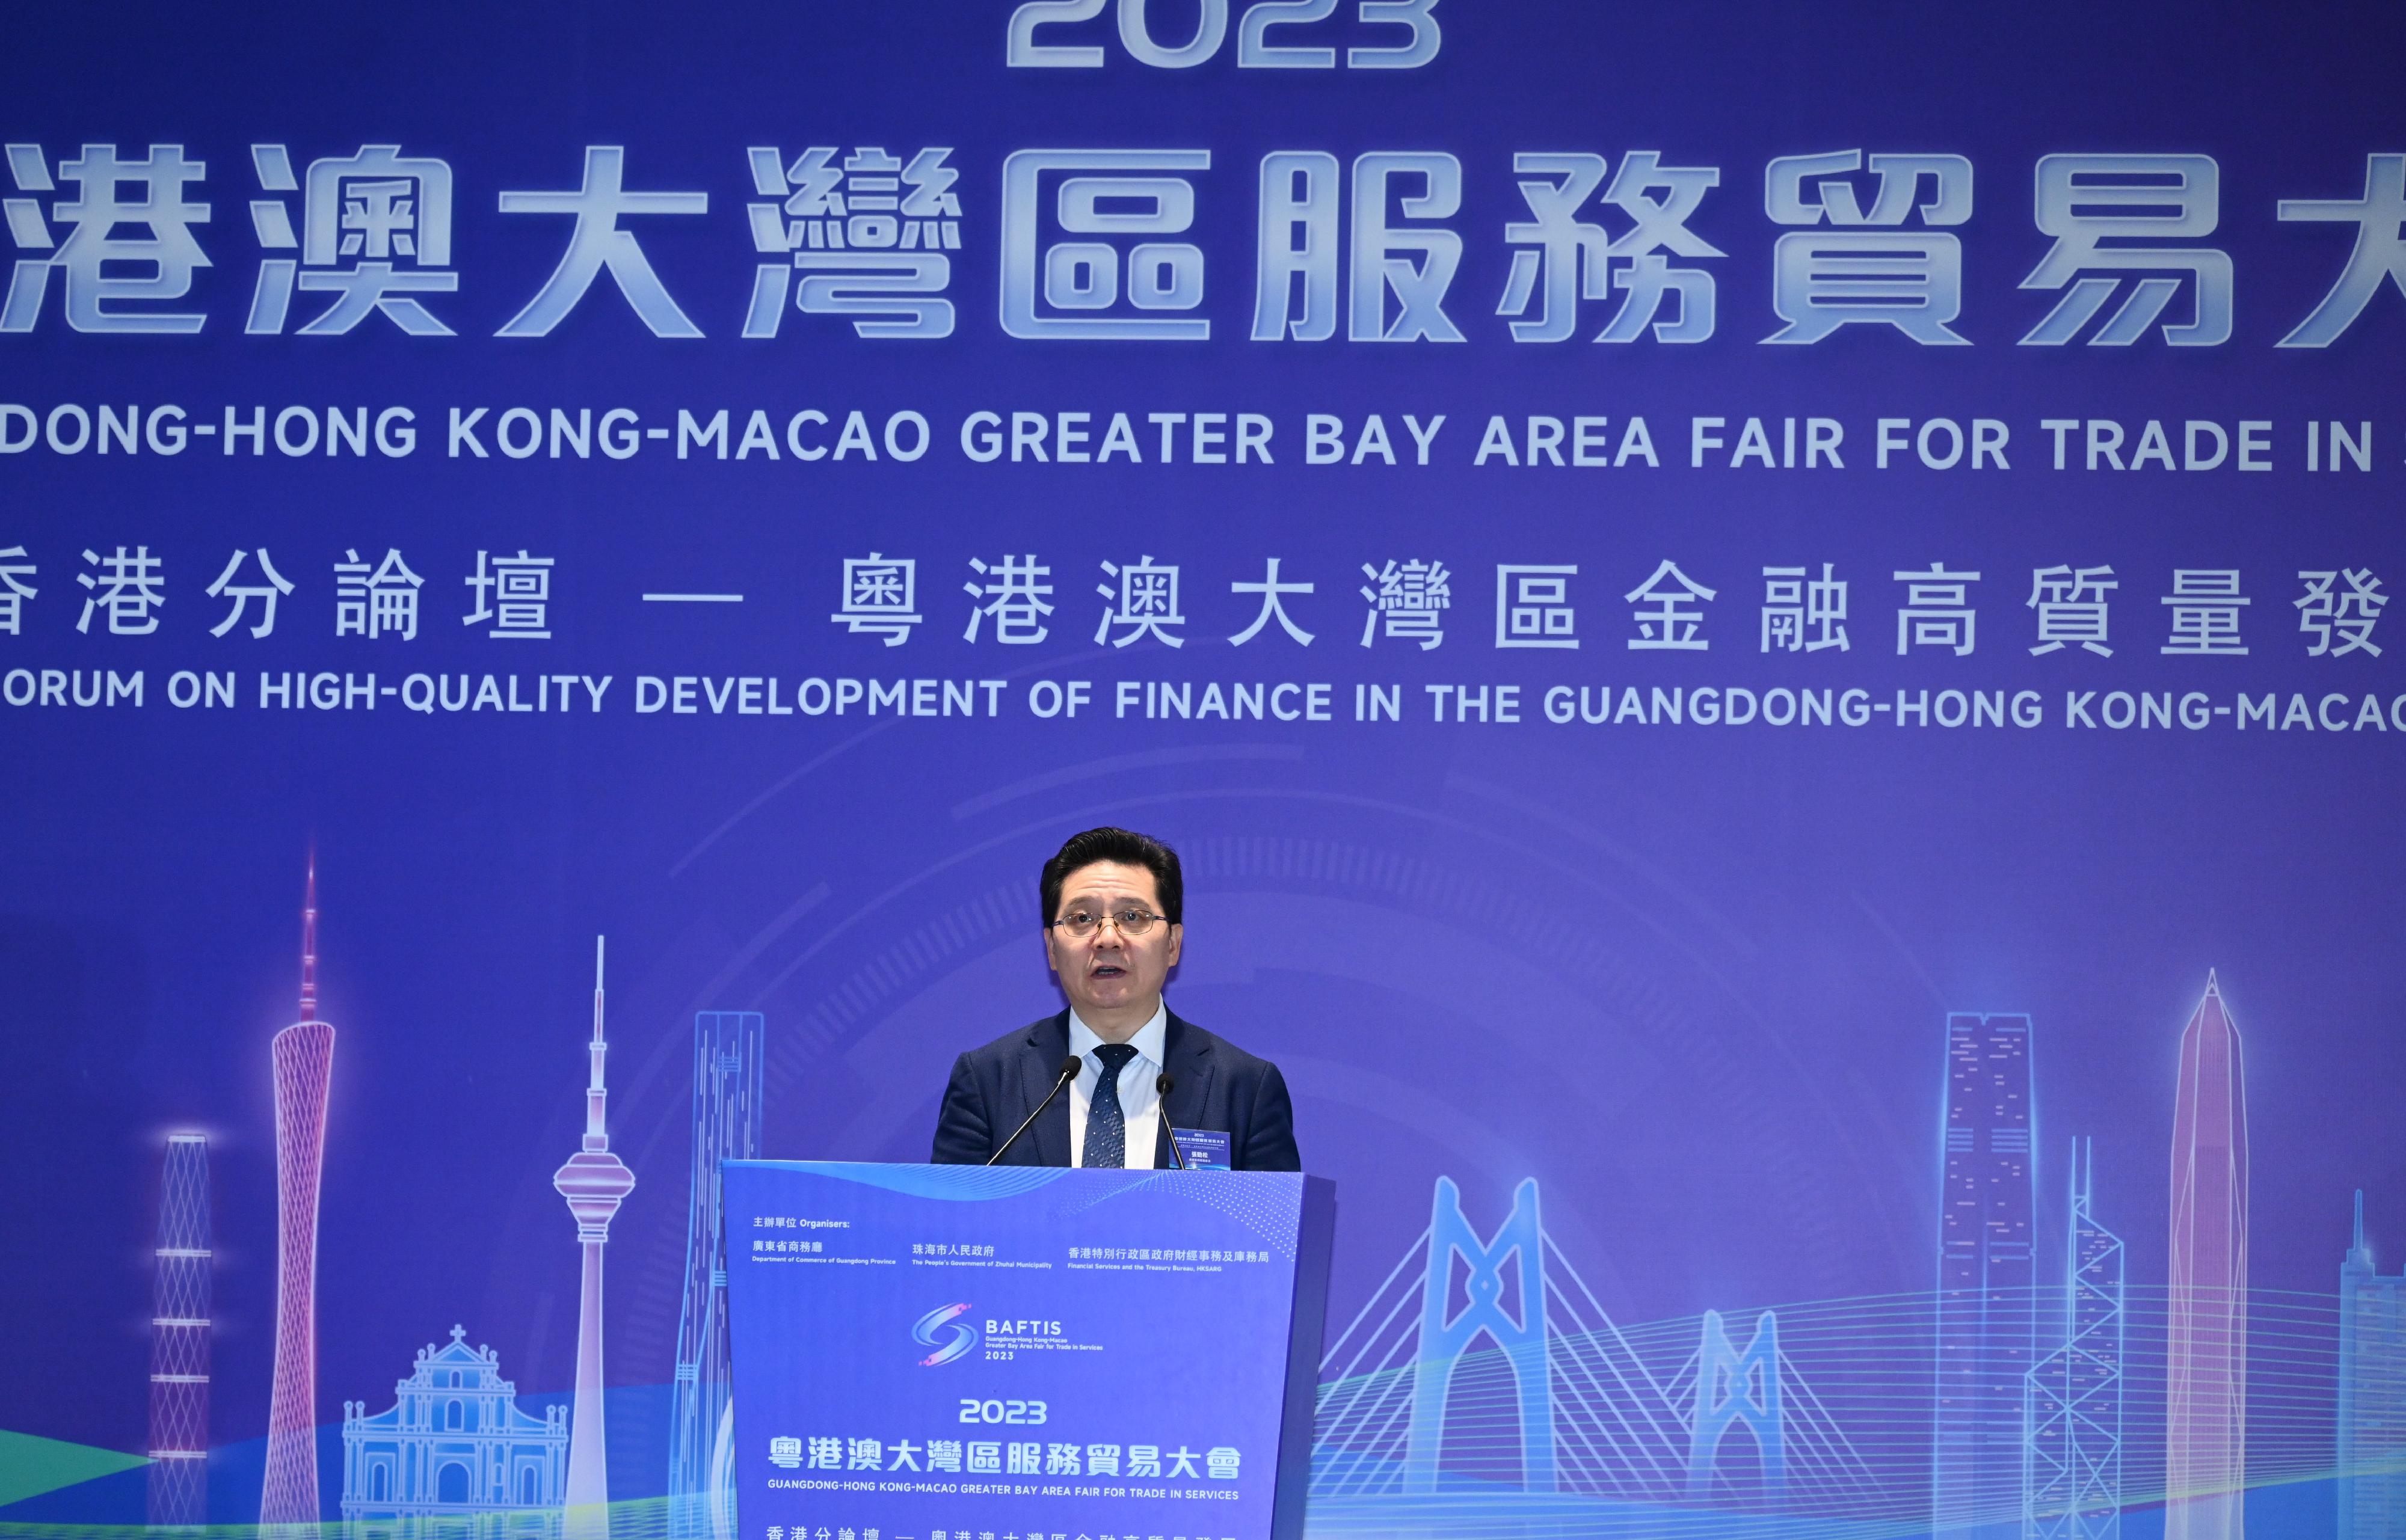 The Financial Services and the Treasury Bureau, the Department of Commerce of Guangdong Province and the People's Government of Zhuhai Municipality today (December 7) jointly held the Hong Kong Sub-forum of the 2023 Guangdong-Hong Kong-Macao Greater Bay Area Fair for Trade in Services. Photo shows the Director-General of the Department of Commerce of Guangdong Province, Mr Zhang Jinsong, speaking at the Sub-forum.